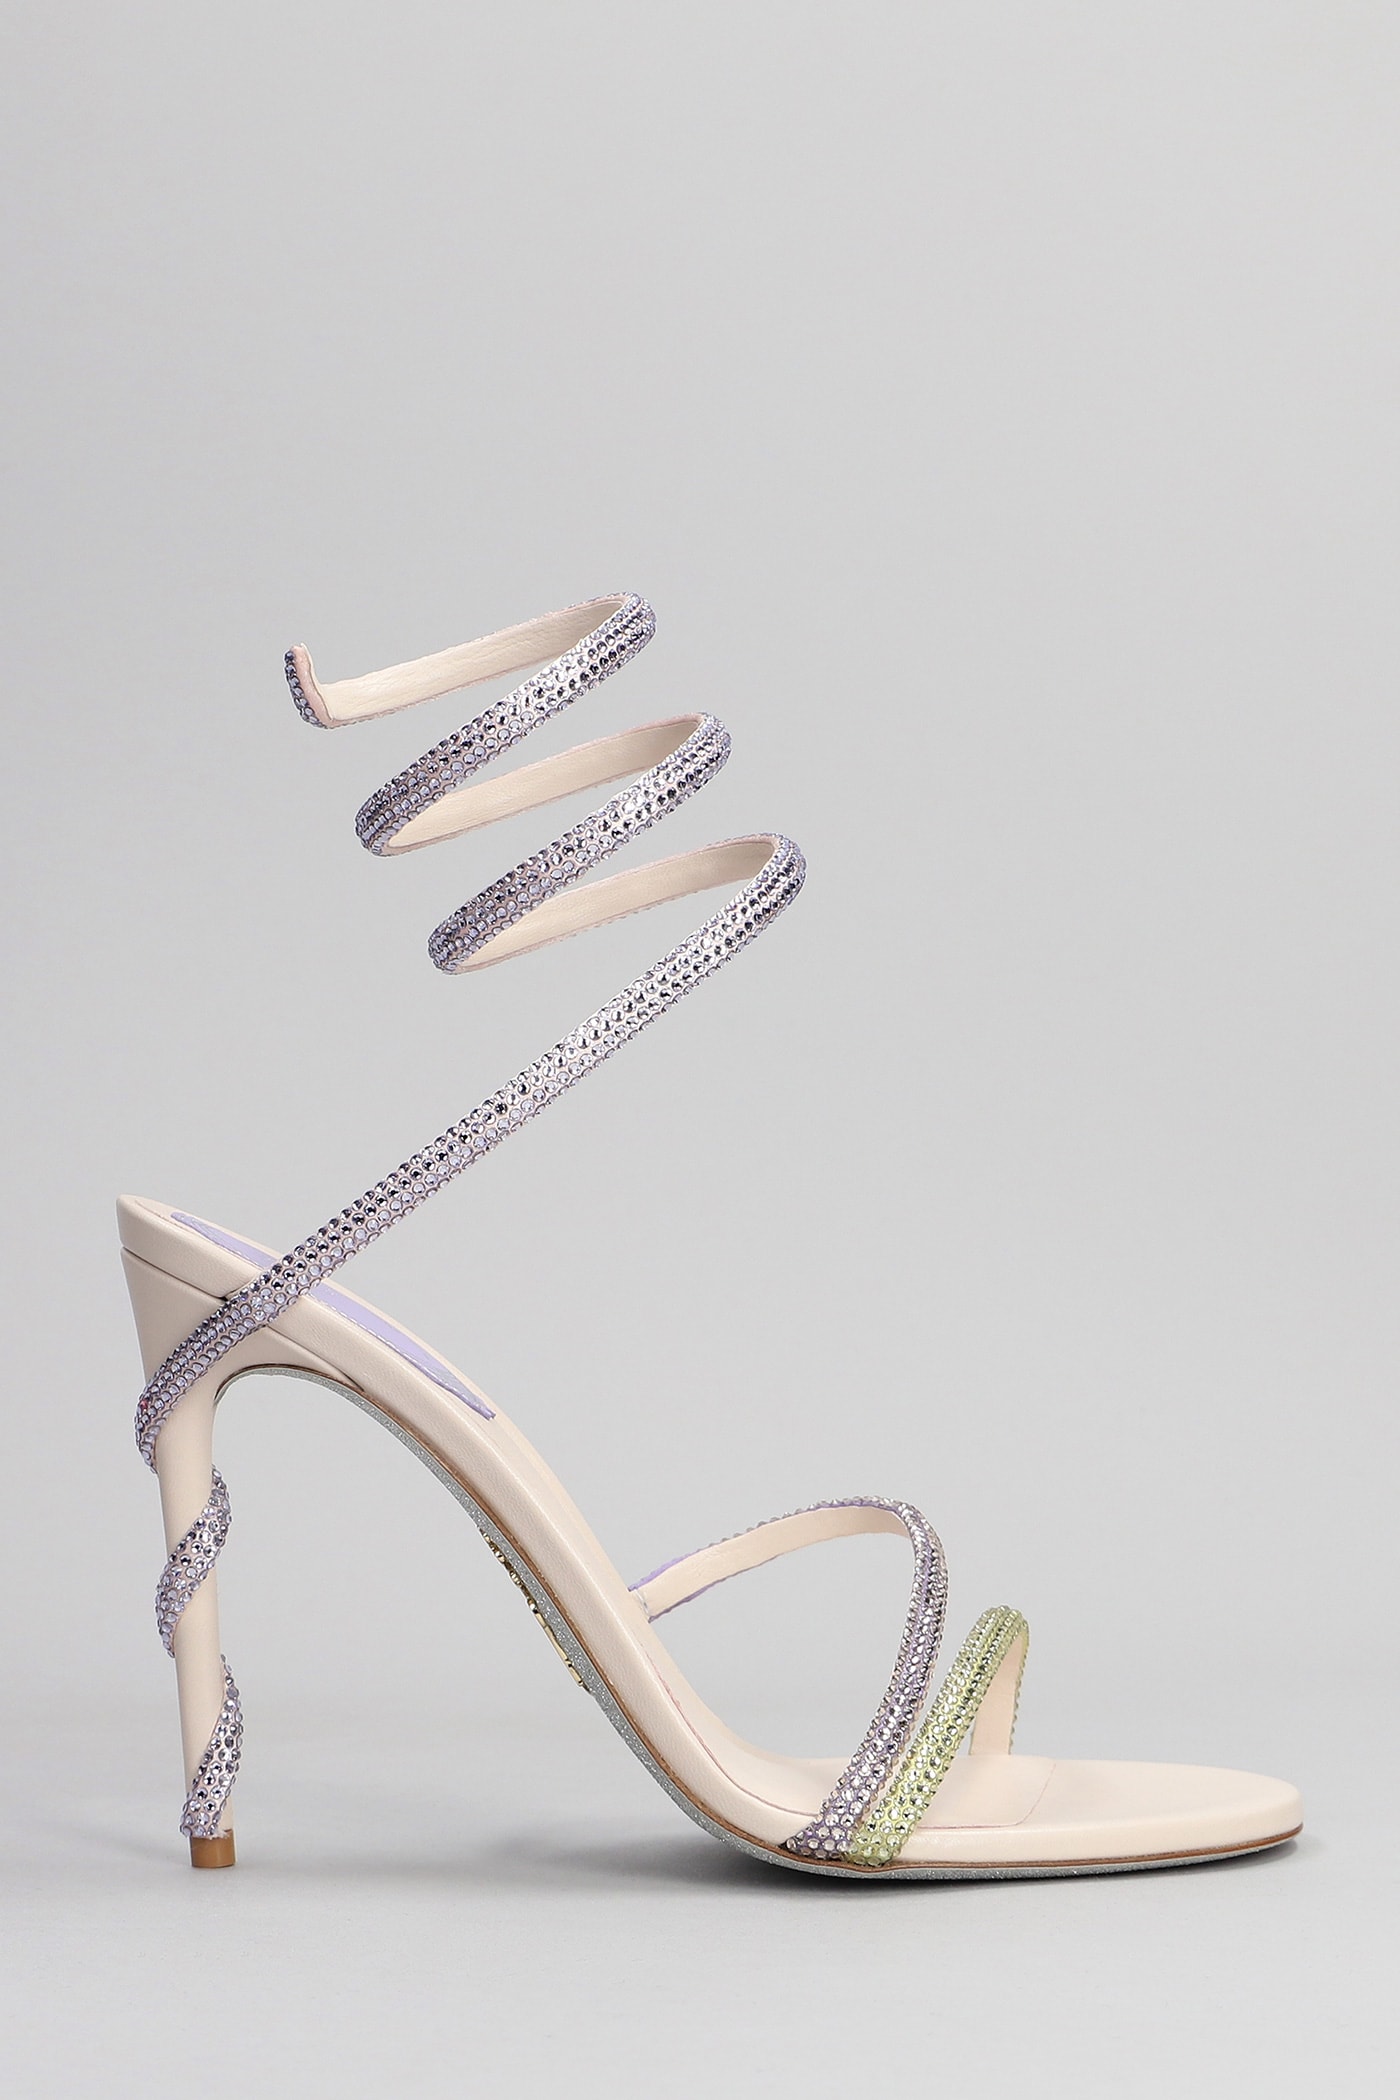 René Caovilla Margot Sandals In Yellow Leather